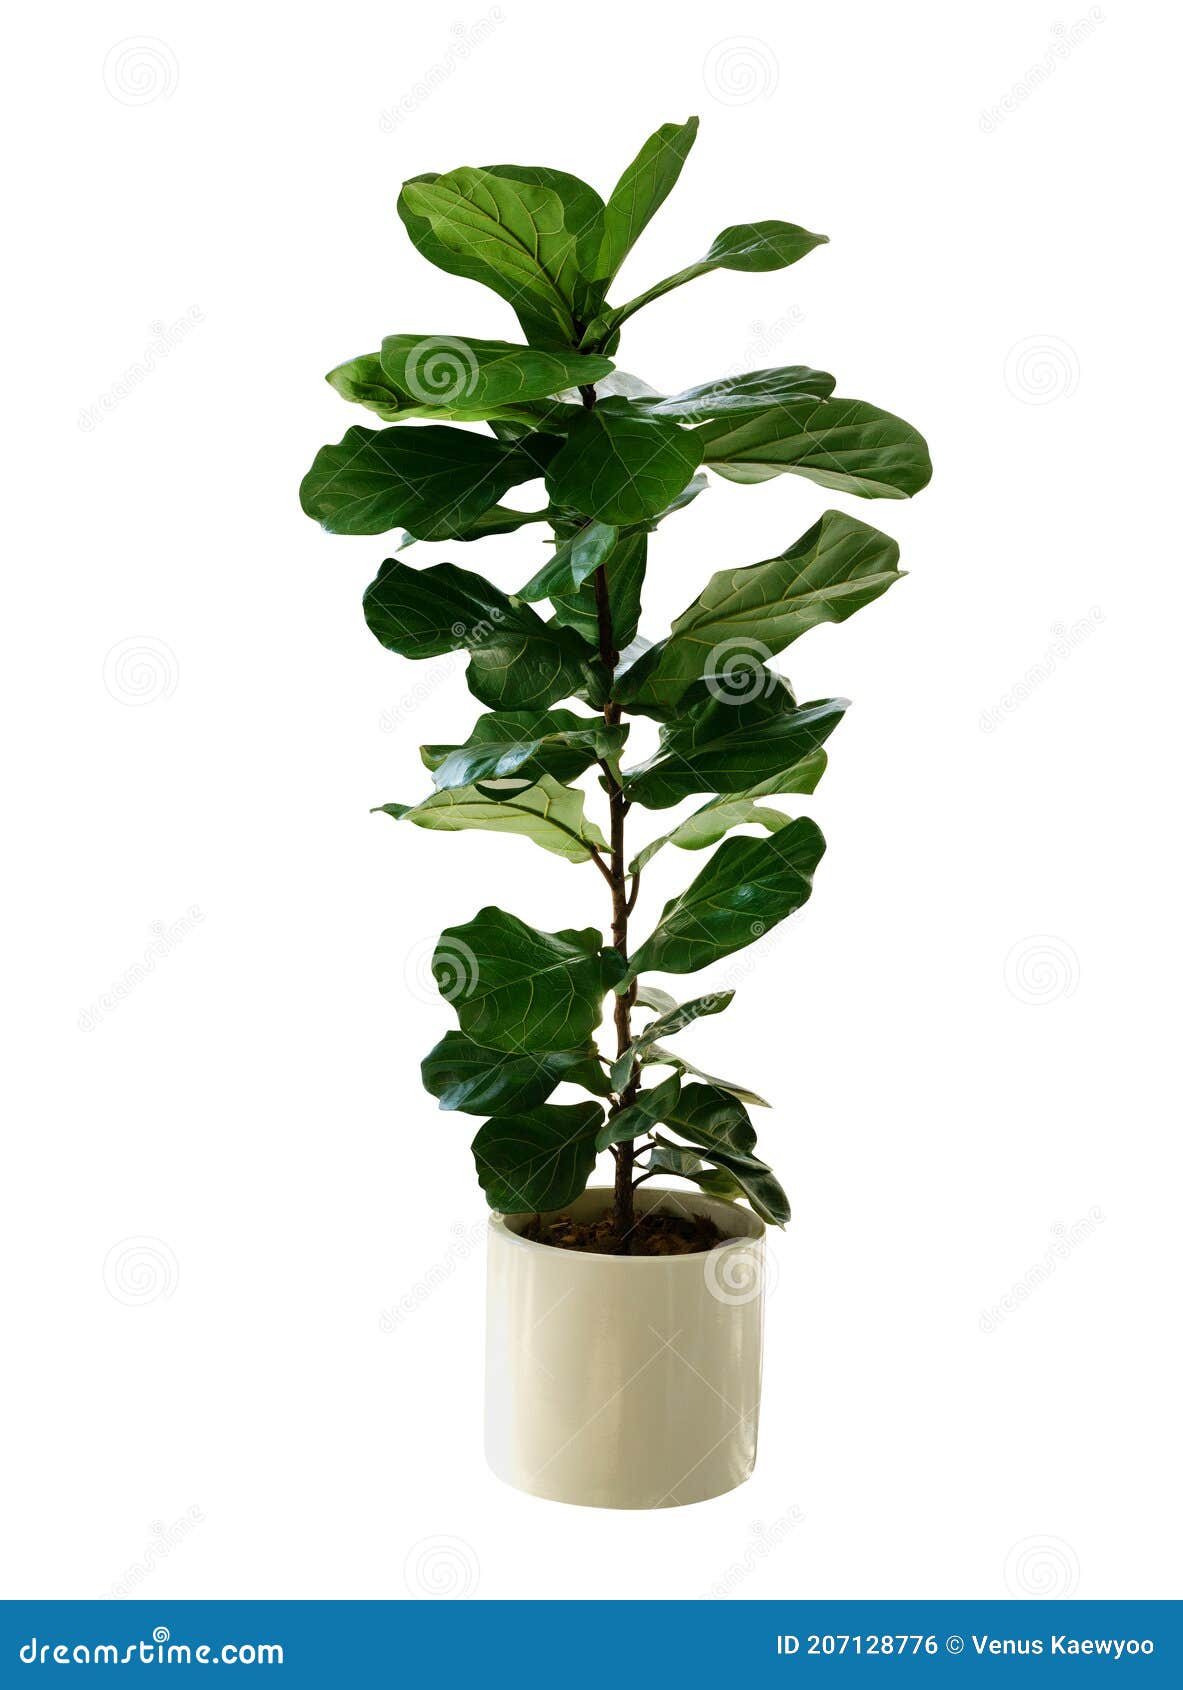 green leaves tropical houseplant fiddle-leaf fig tree ficus lyrata in small ceramic pot, ornamental tree  on white